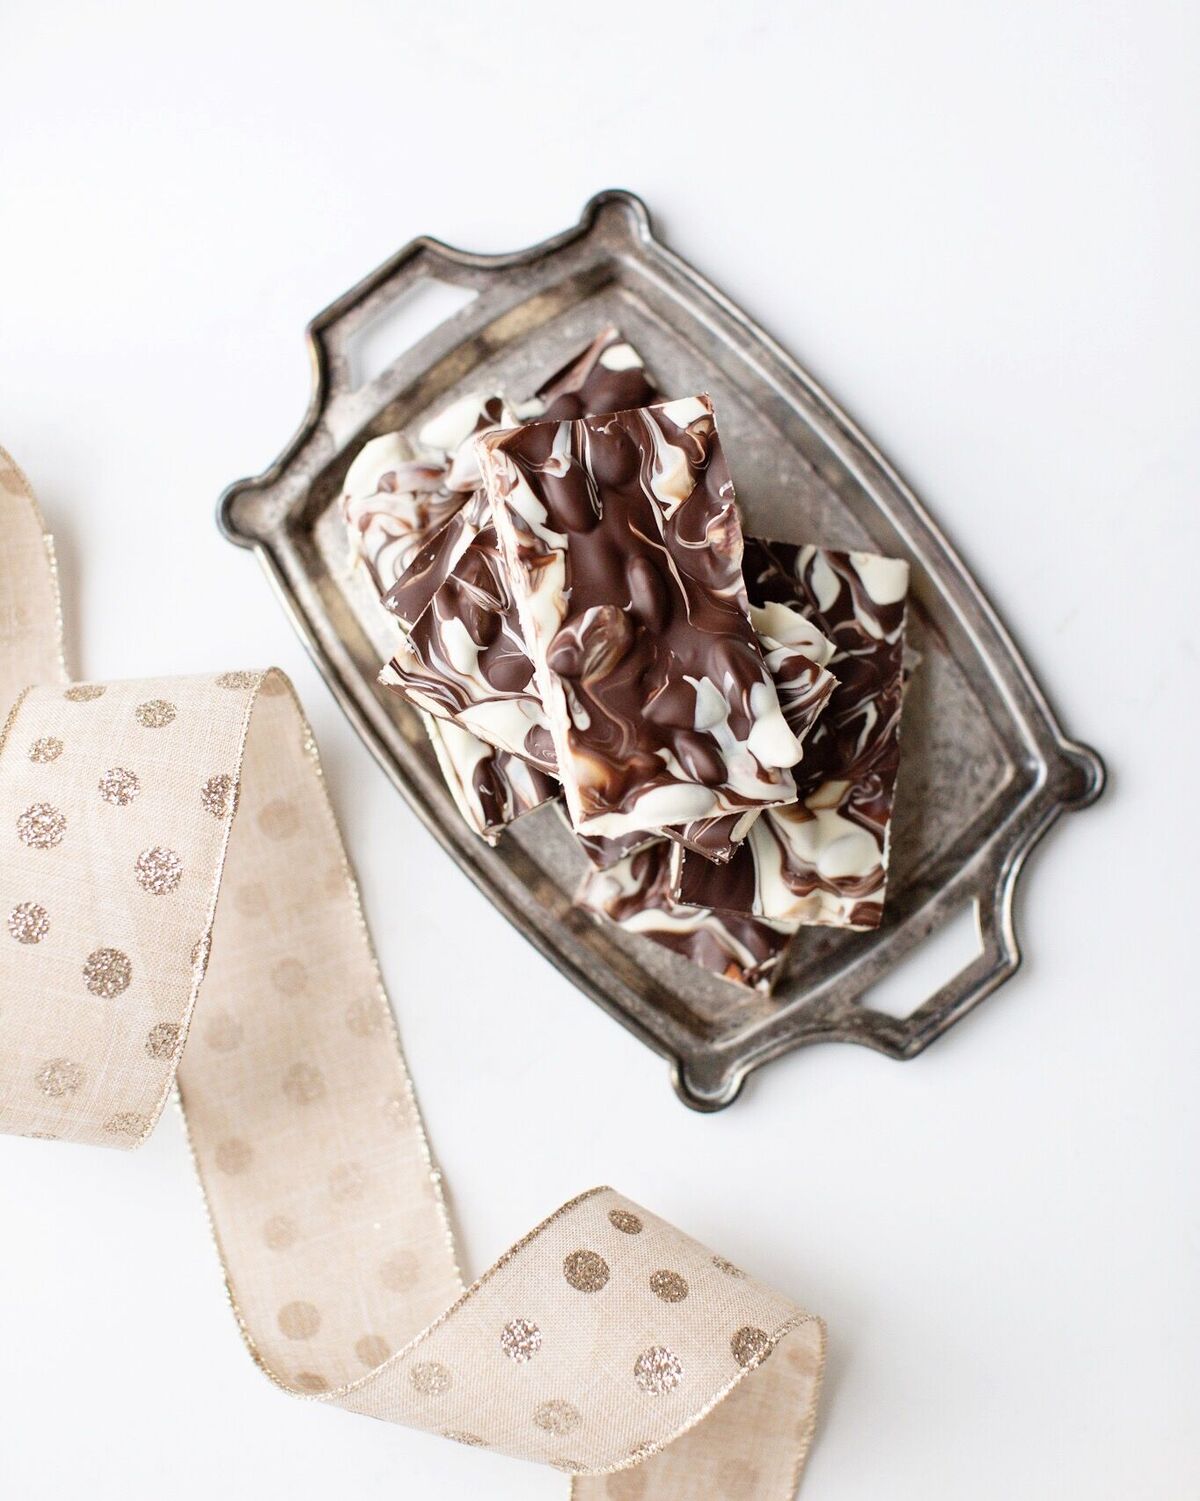 How to make homemade chocolate bark along with topping ideas and fun ways to package it for the perfect hostess or Christmas gift!